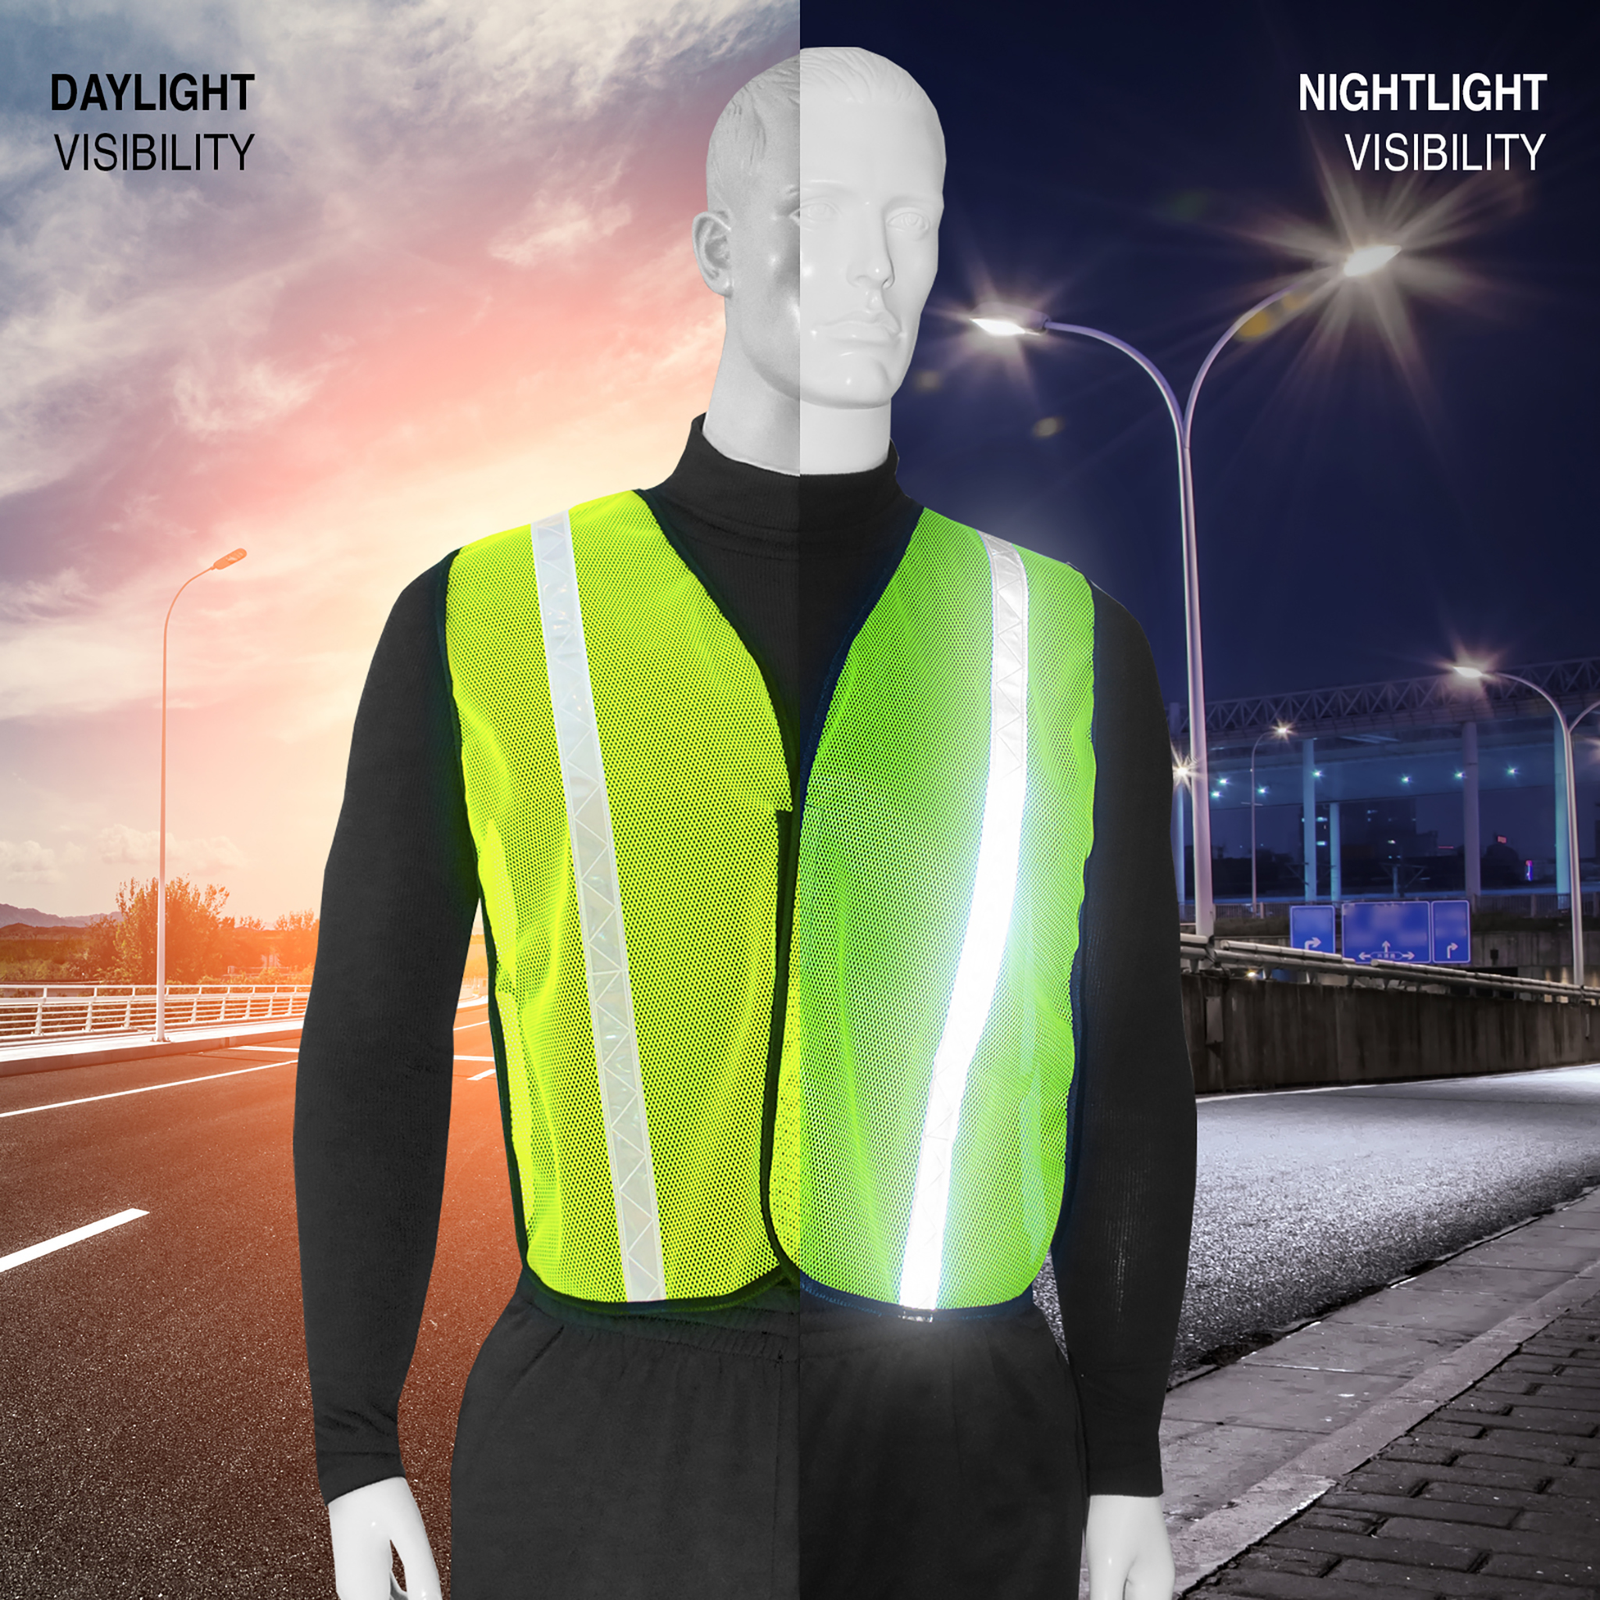 Mannequin wearing a lime Jorestech safety vest and it compares how bright it looks during day and night time 